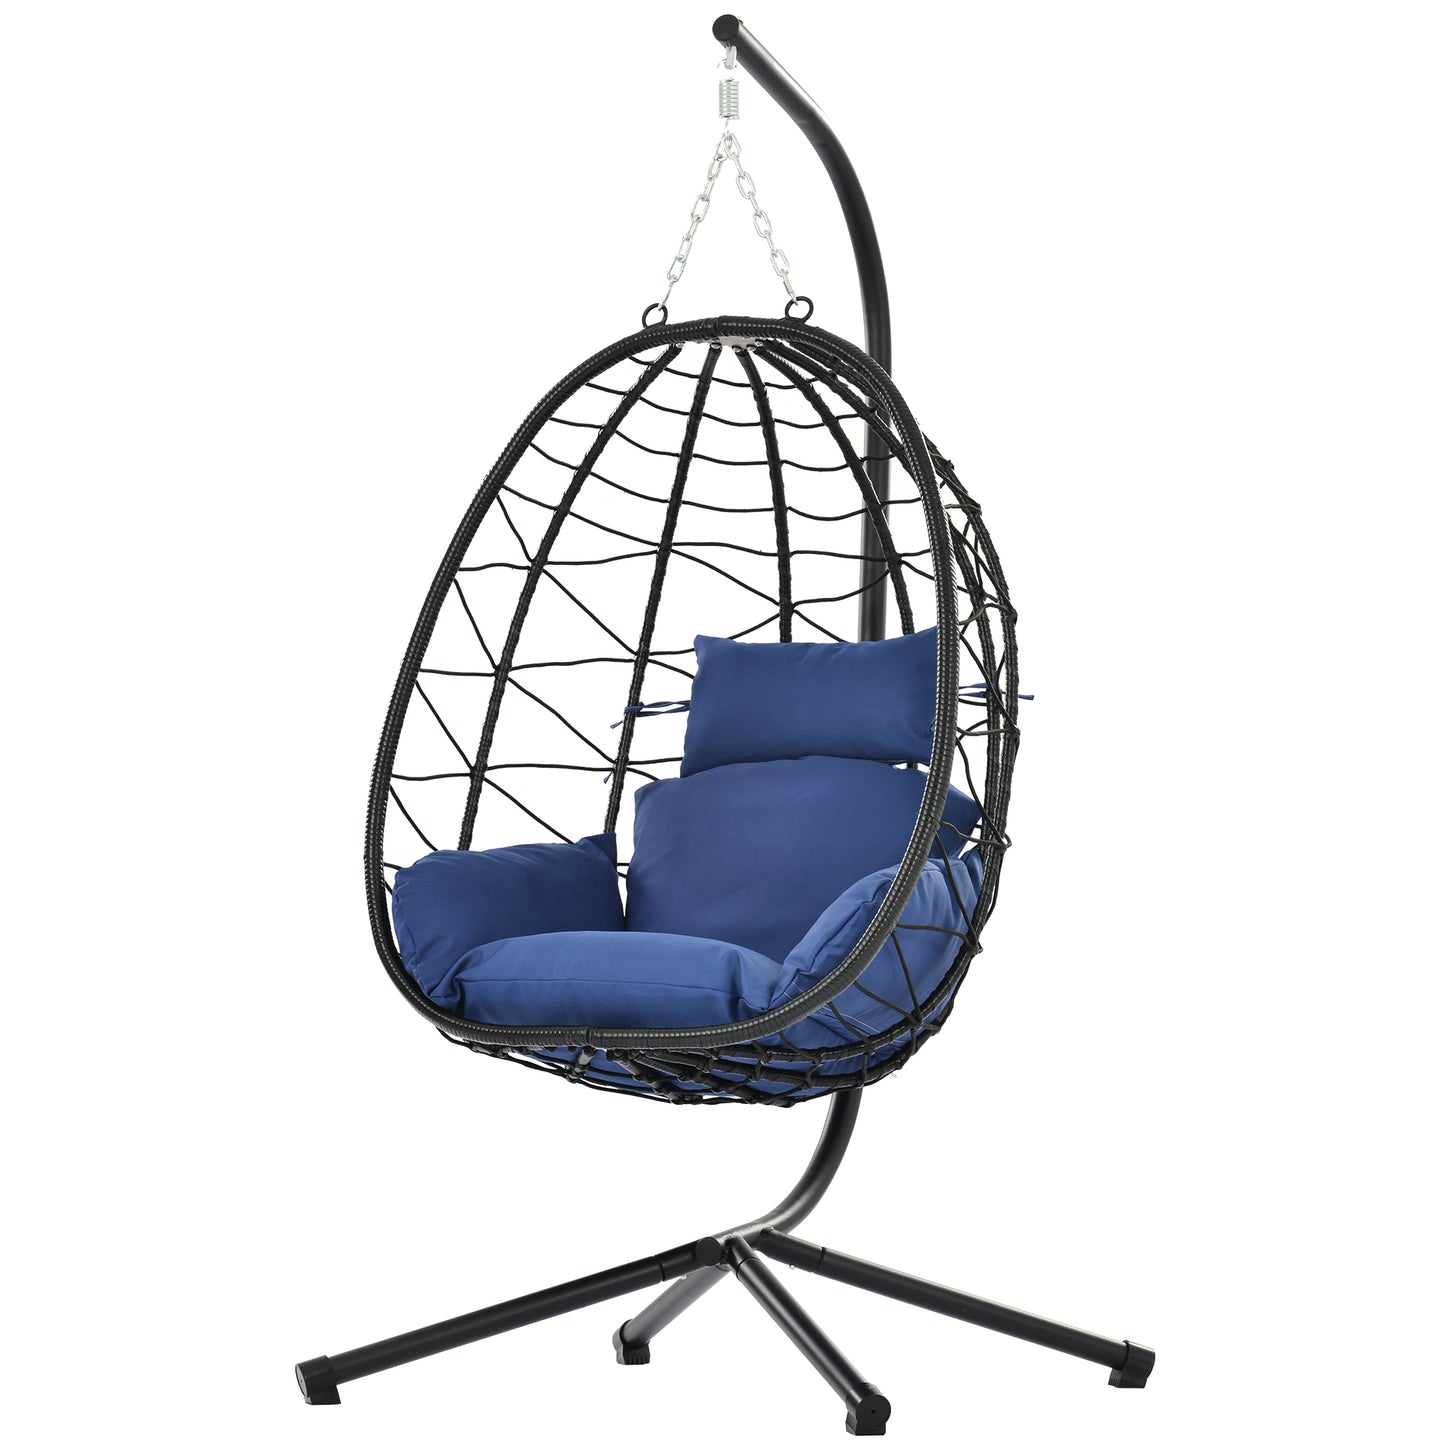 SYNGAR 2 Piece Indoor Outdoor Patio Wicker Hanging Chairs, Swing Hammock Egg Chairs Waterproof Cushions with Steel Frame, 300lbs Capacity for Patio Balcony Bedroom Living Room, Navy Blue